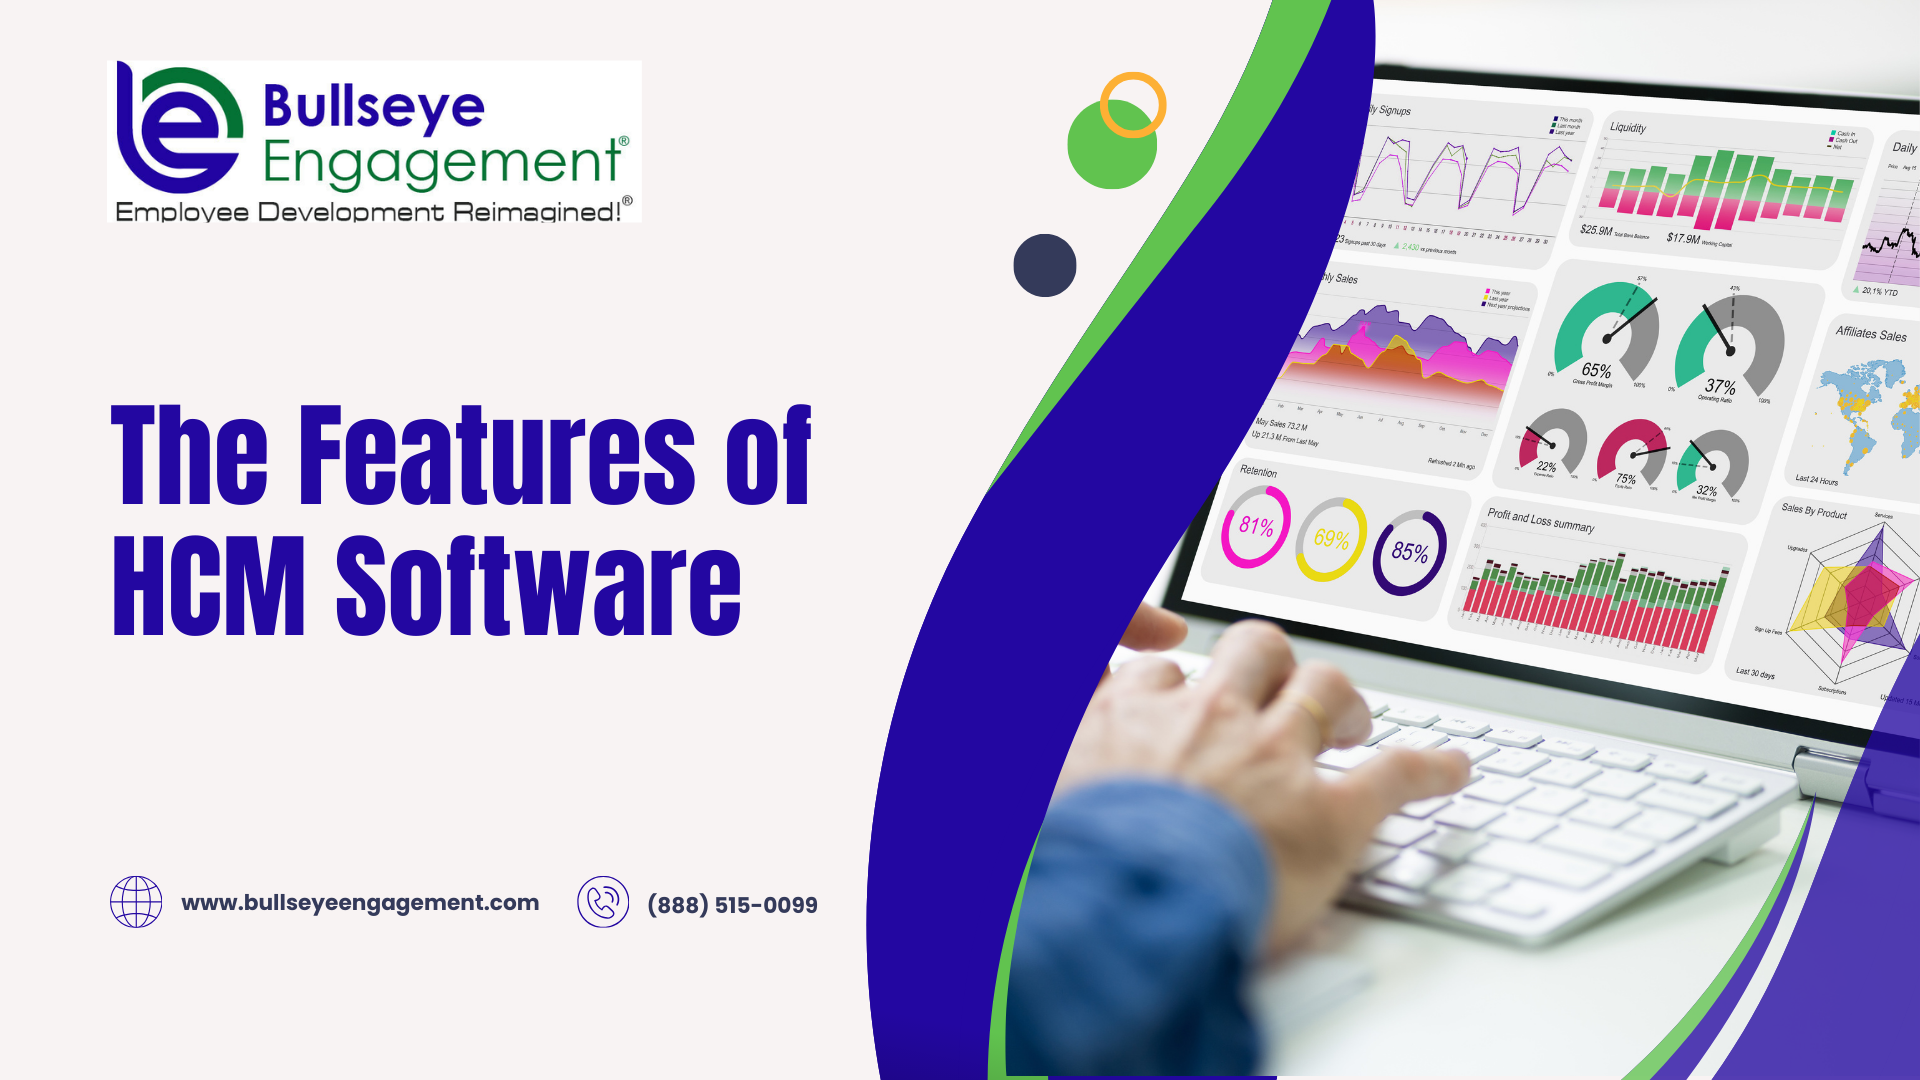 What are the Features of HCM Software?